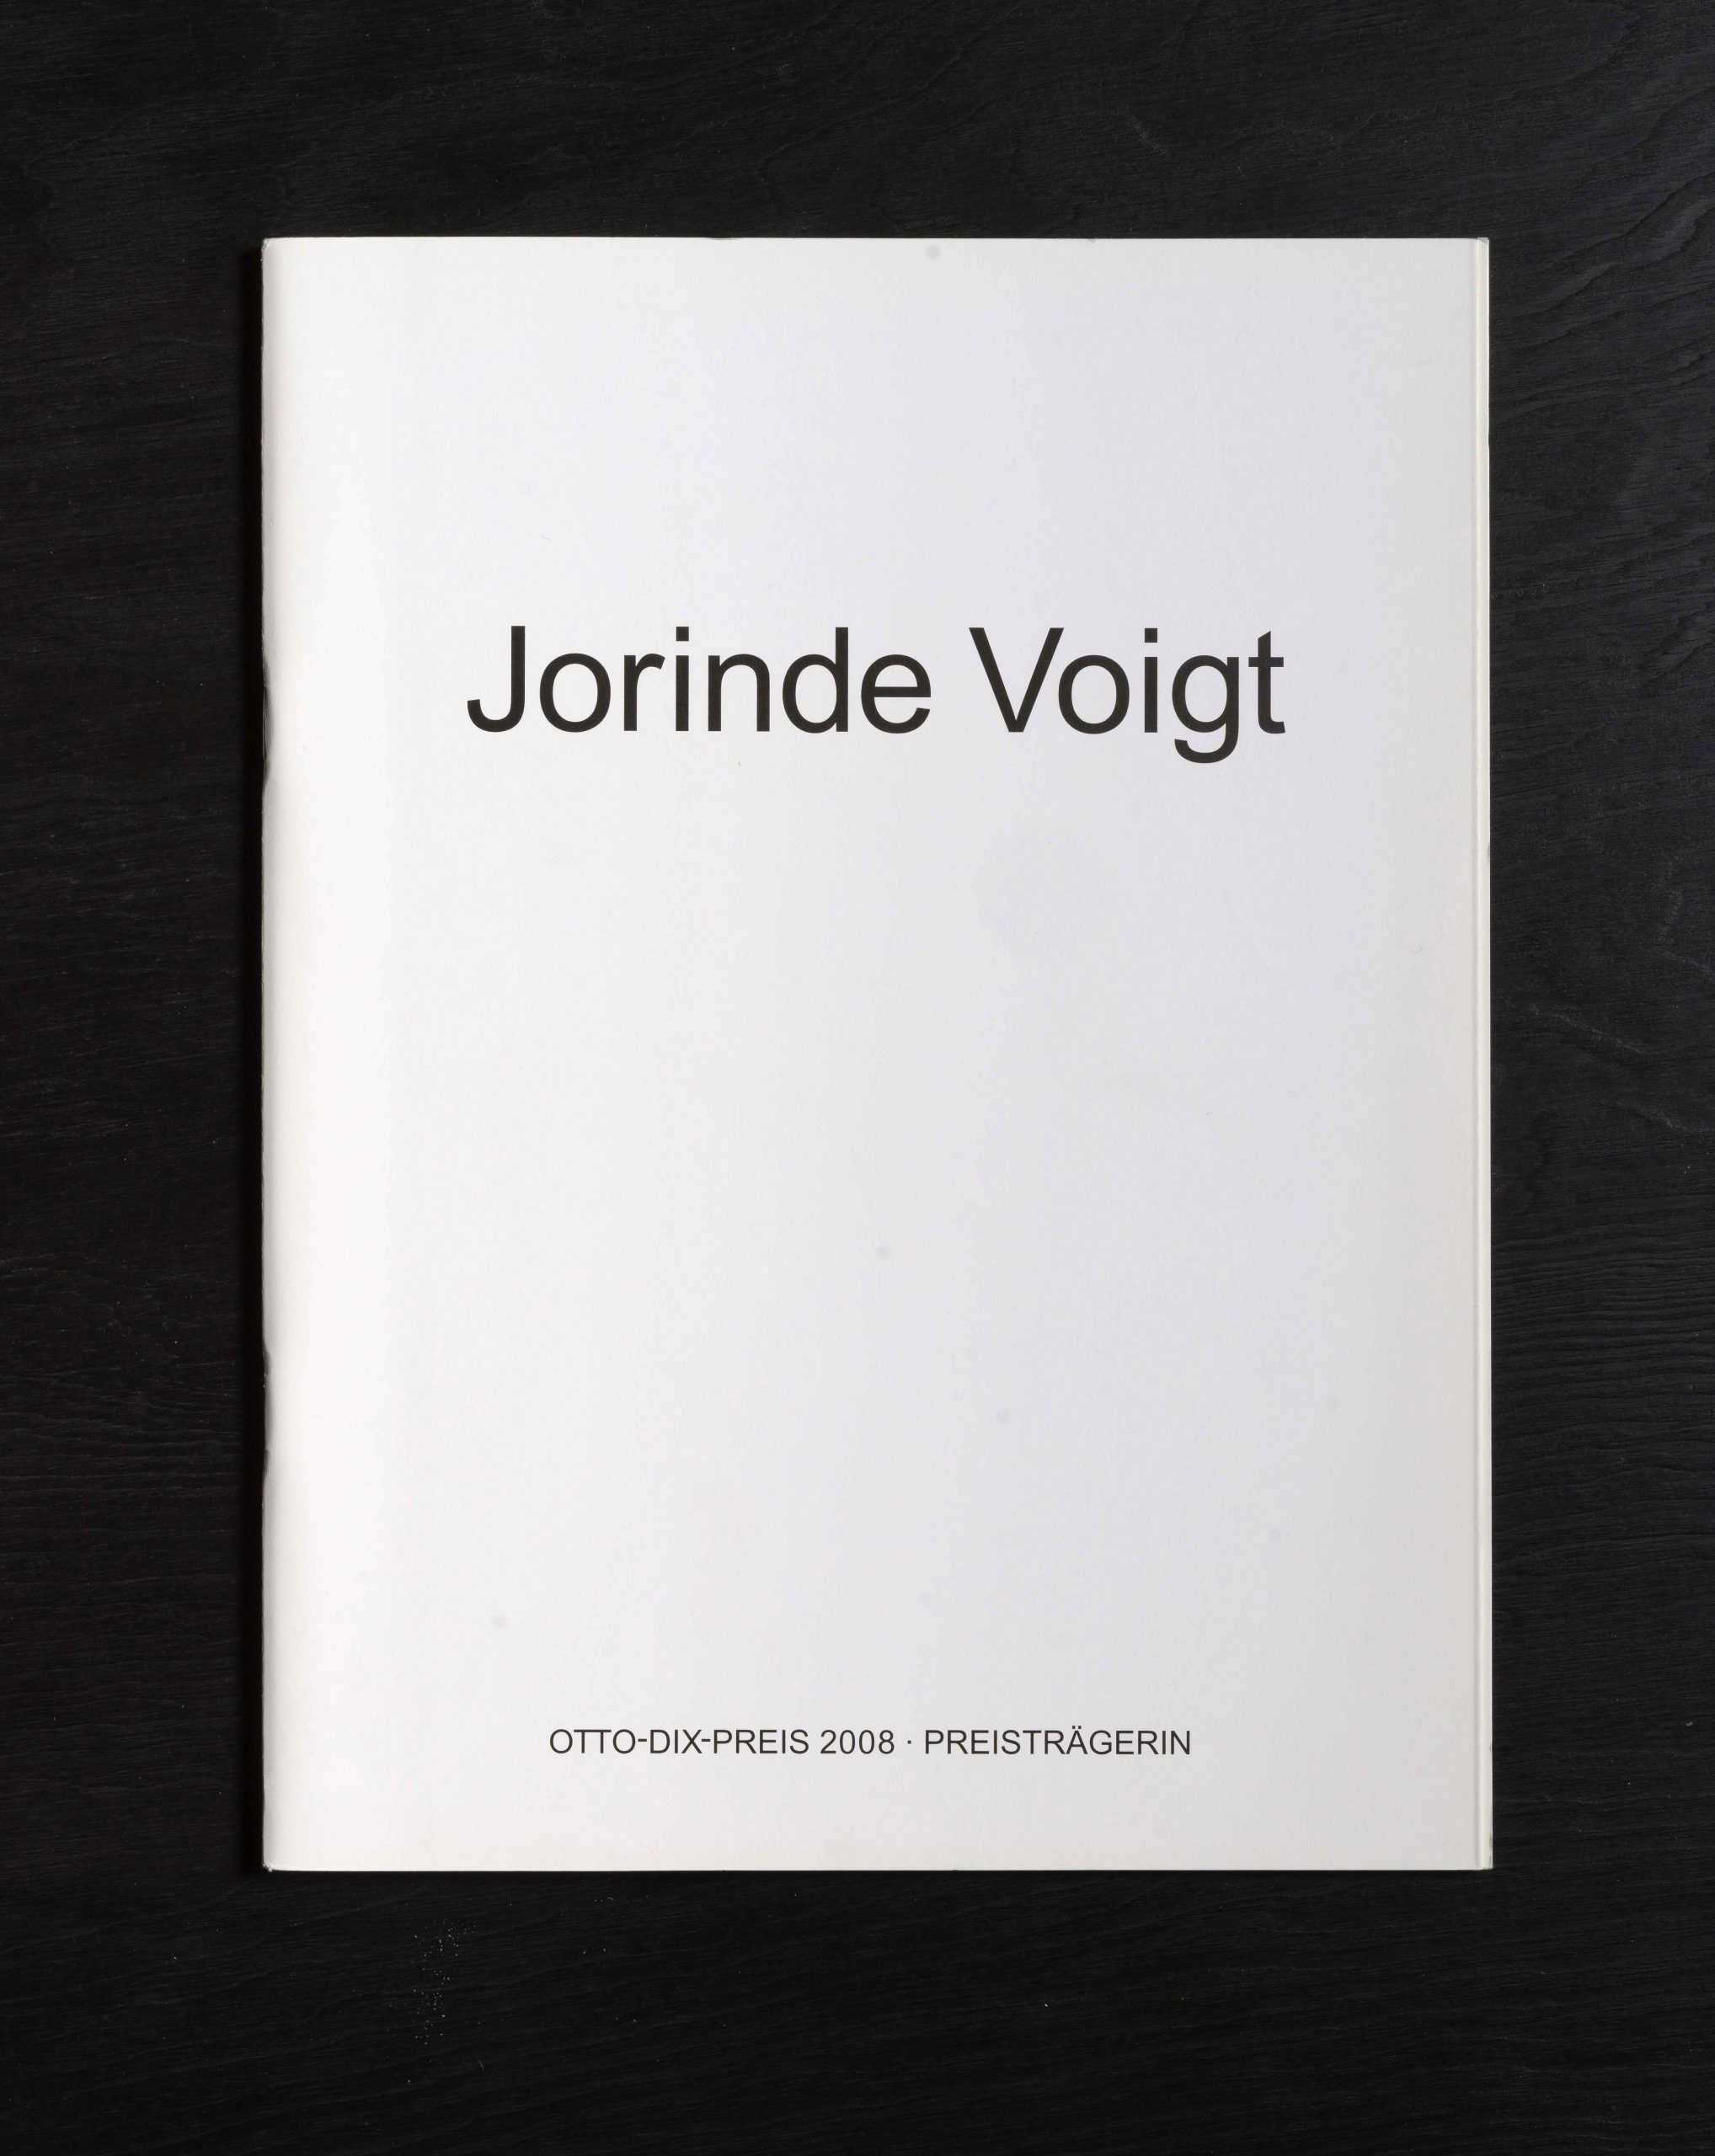 Jorinde Voigt. Otto-Dix-Preis 2008. Preisträgerin; Catalog on the occasion of the same entitled exhibition and awarding as the Price winner at Kunstsammlung Gera. Editor: Dr. Holger Peter Saupe, Text: Andreas Schalhorn. Language: Englisch, German, total pages: 23, contribution: all pages. Publishing: Kunstsammlung Gera. ISBN: 978-3-910051-56-0, Price: €15,00.